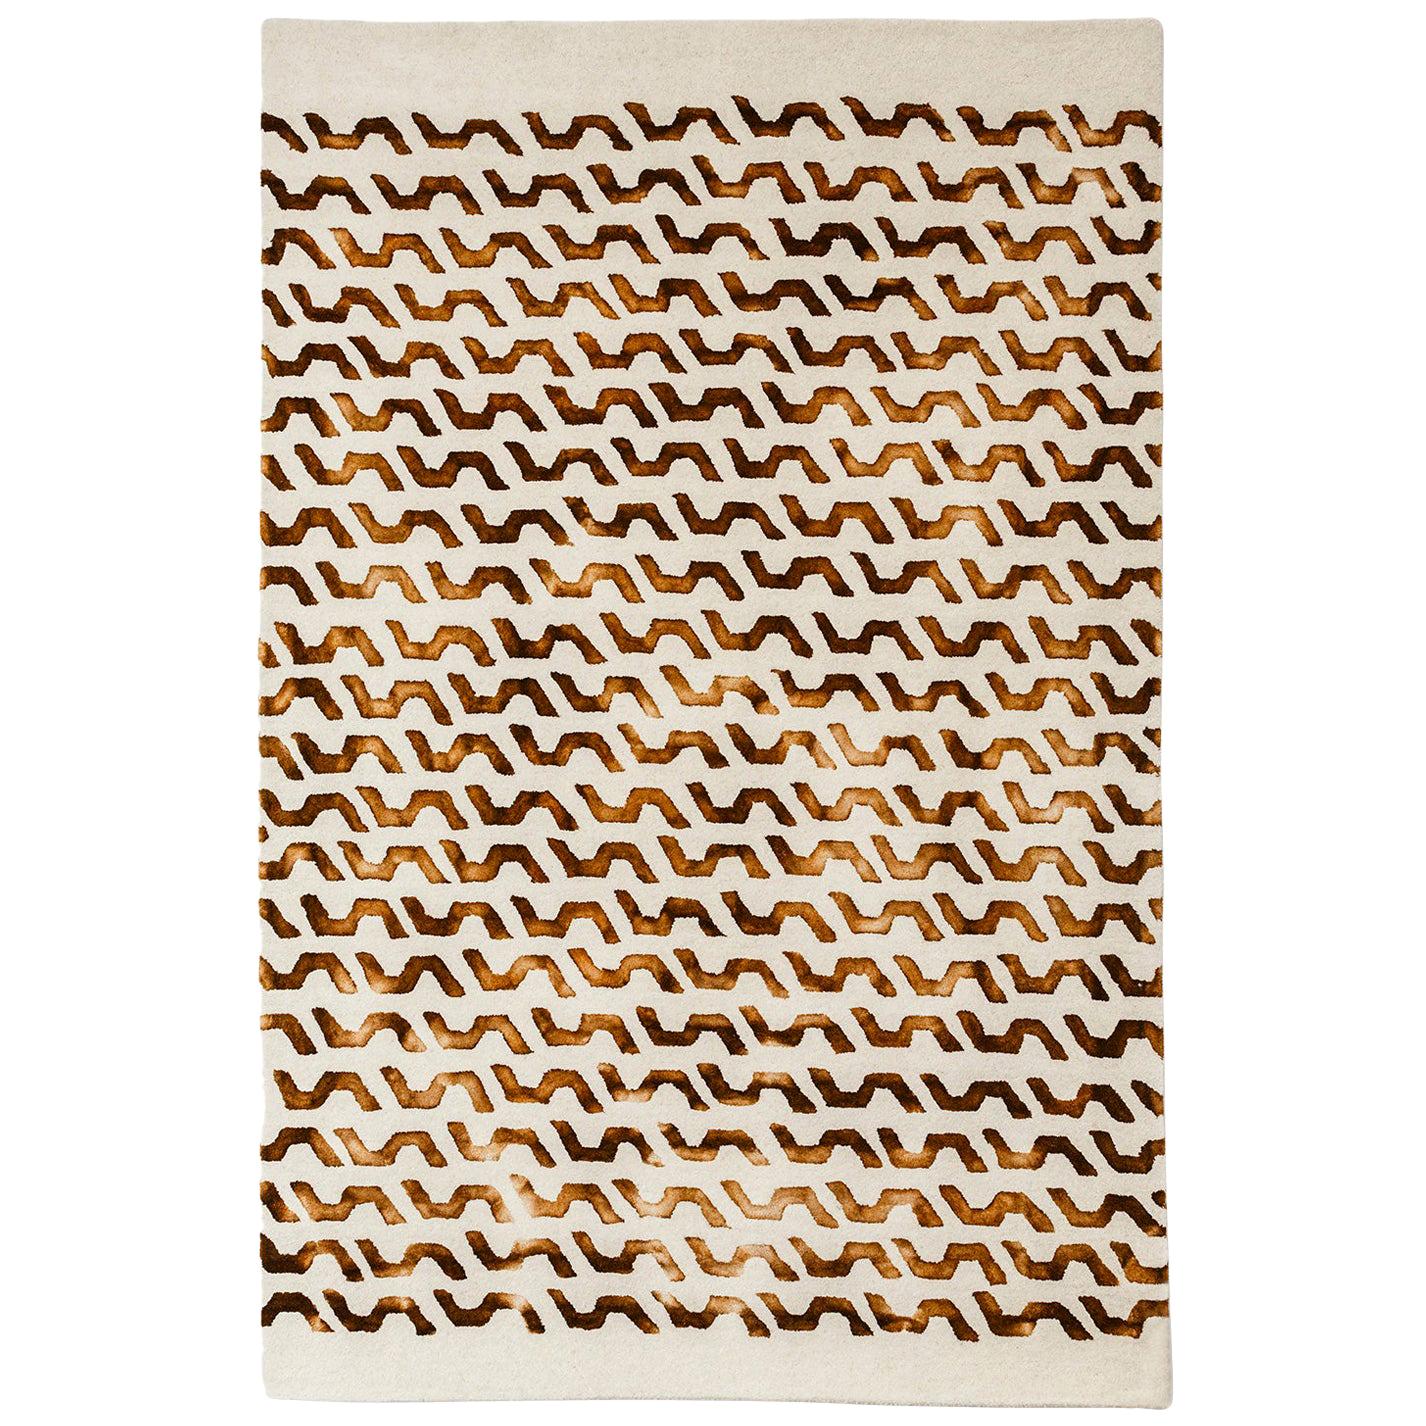 Contemporary Patterned New Zealand Wool Rug by Deanna Comellini 200x300 cm For Sale